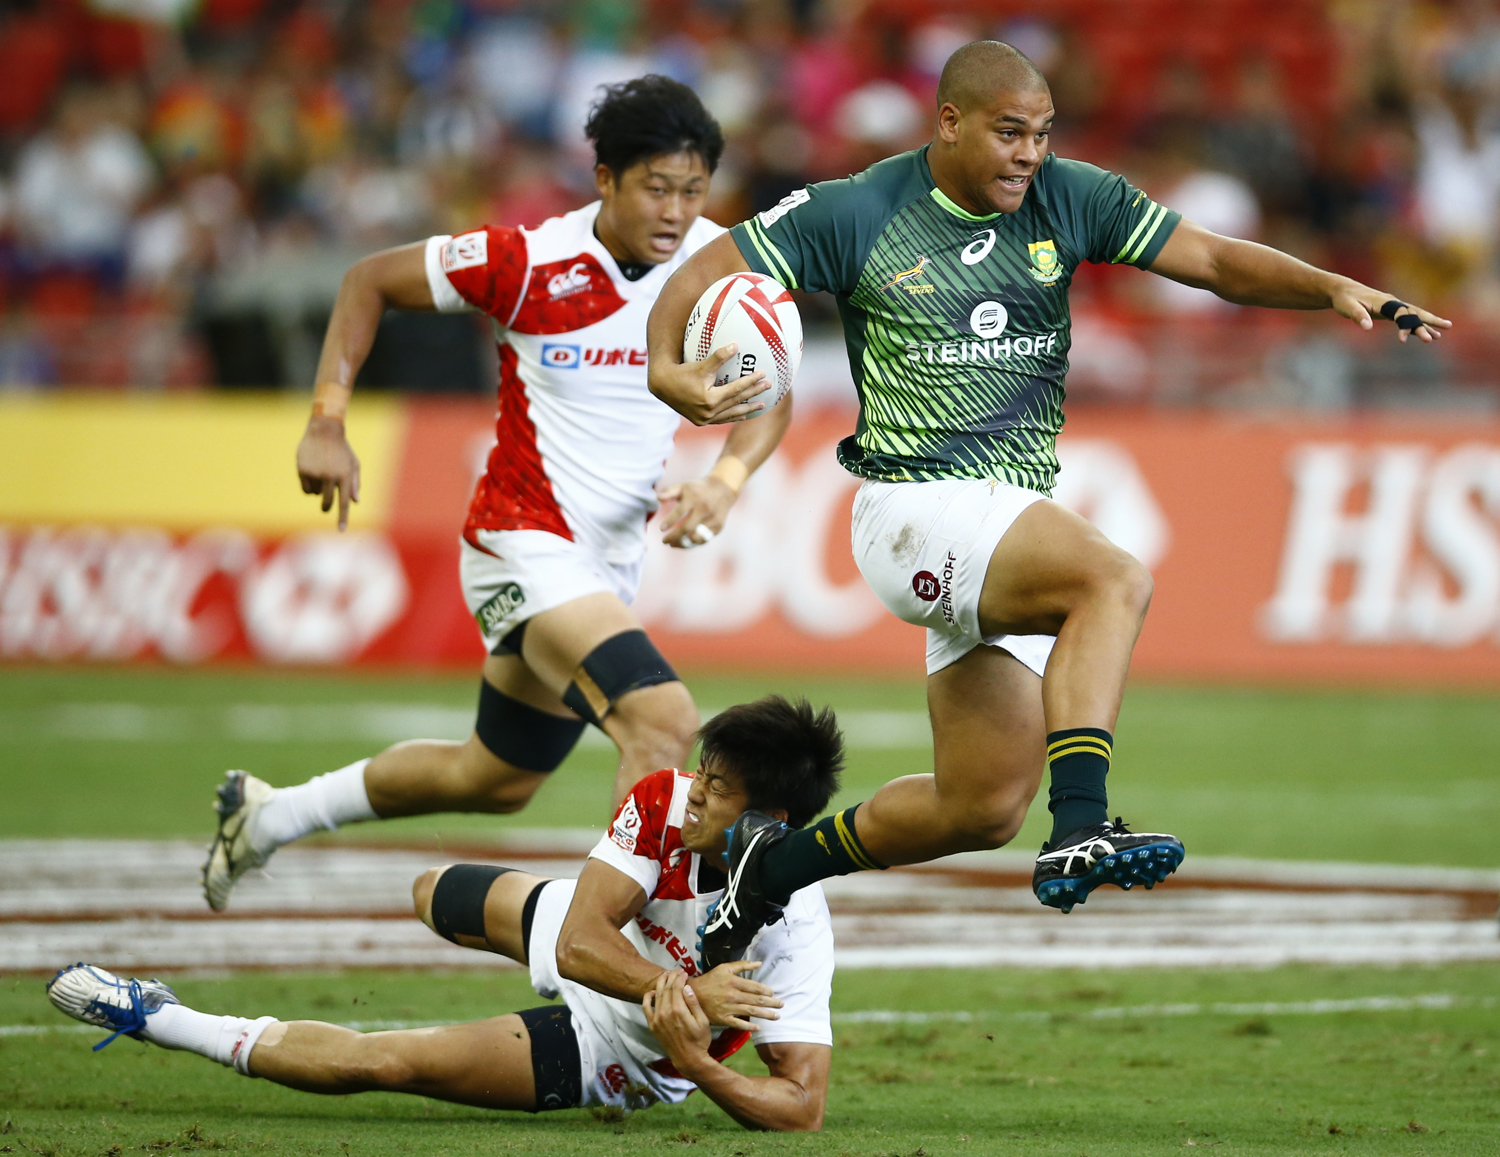  Rugby Union - Singapore Sevens - National Stadium, Singapore, 15/04/17 - South Africa's Zain Davids (R) tries to evade a tackle by Japan's Kosuke Hashino. REUTERS/Yong Teck Lim 